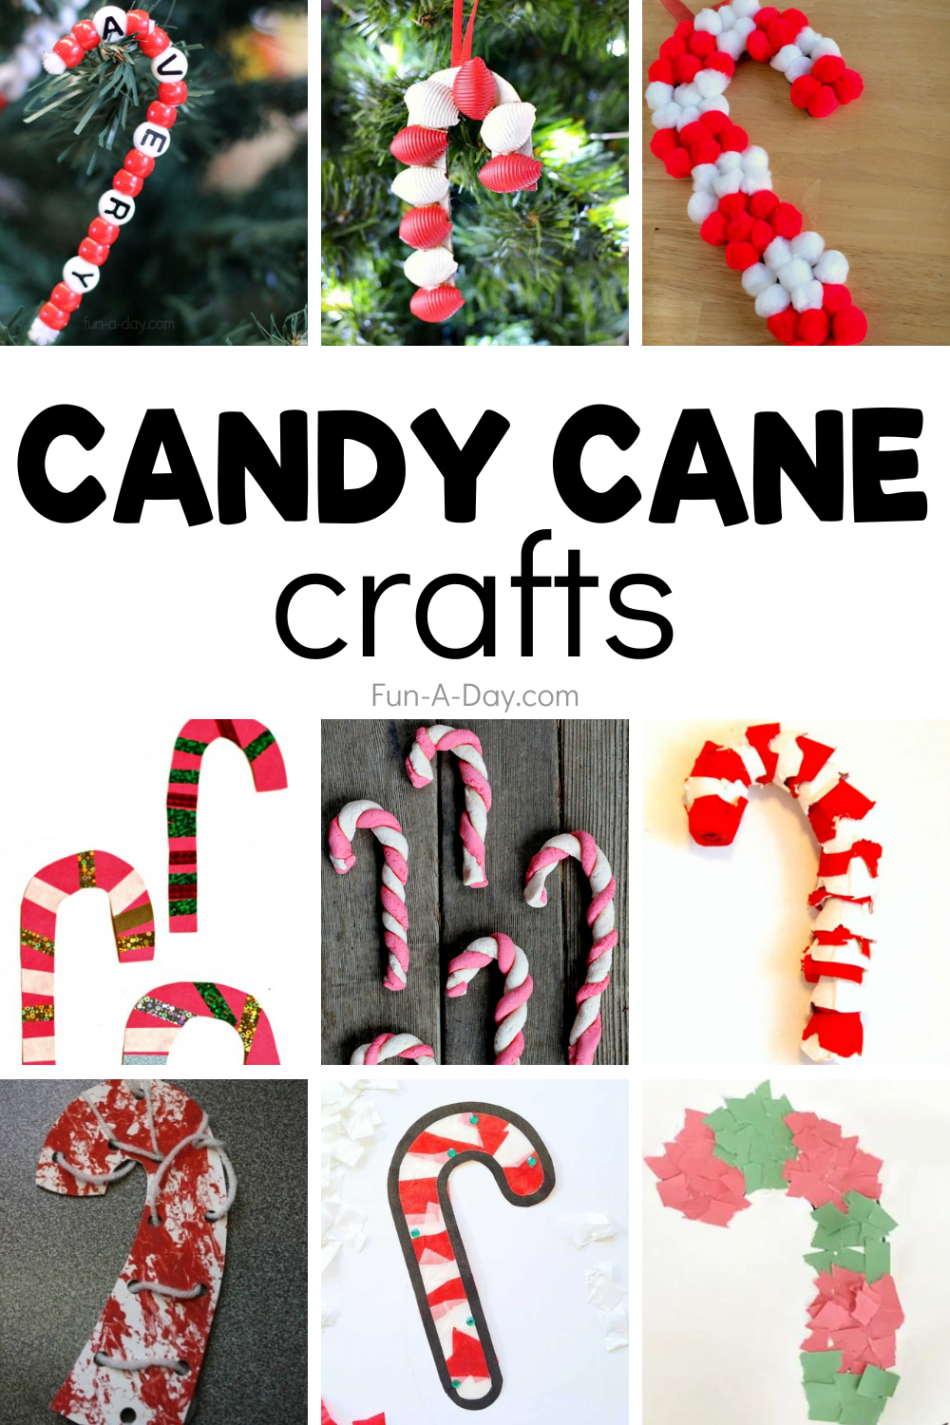 + Candy Cane Crafts and Ornaments for Kids